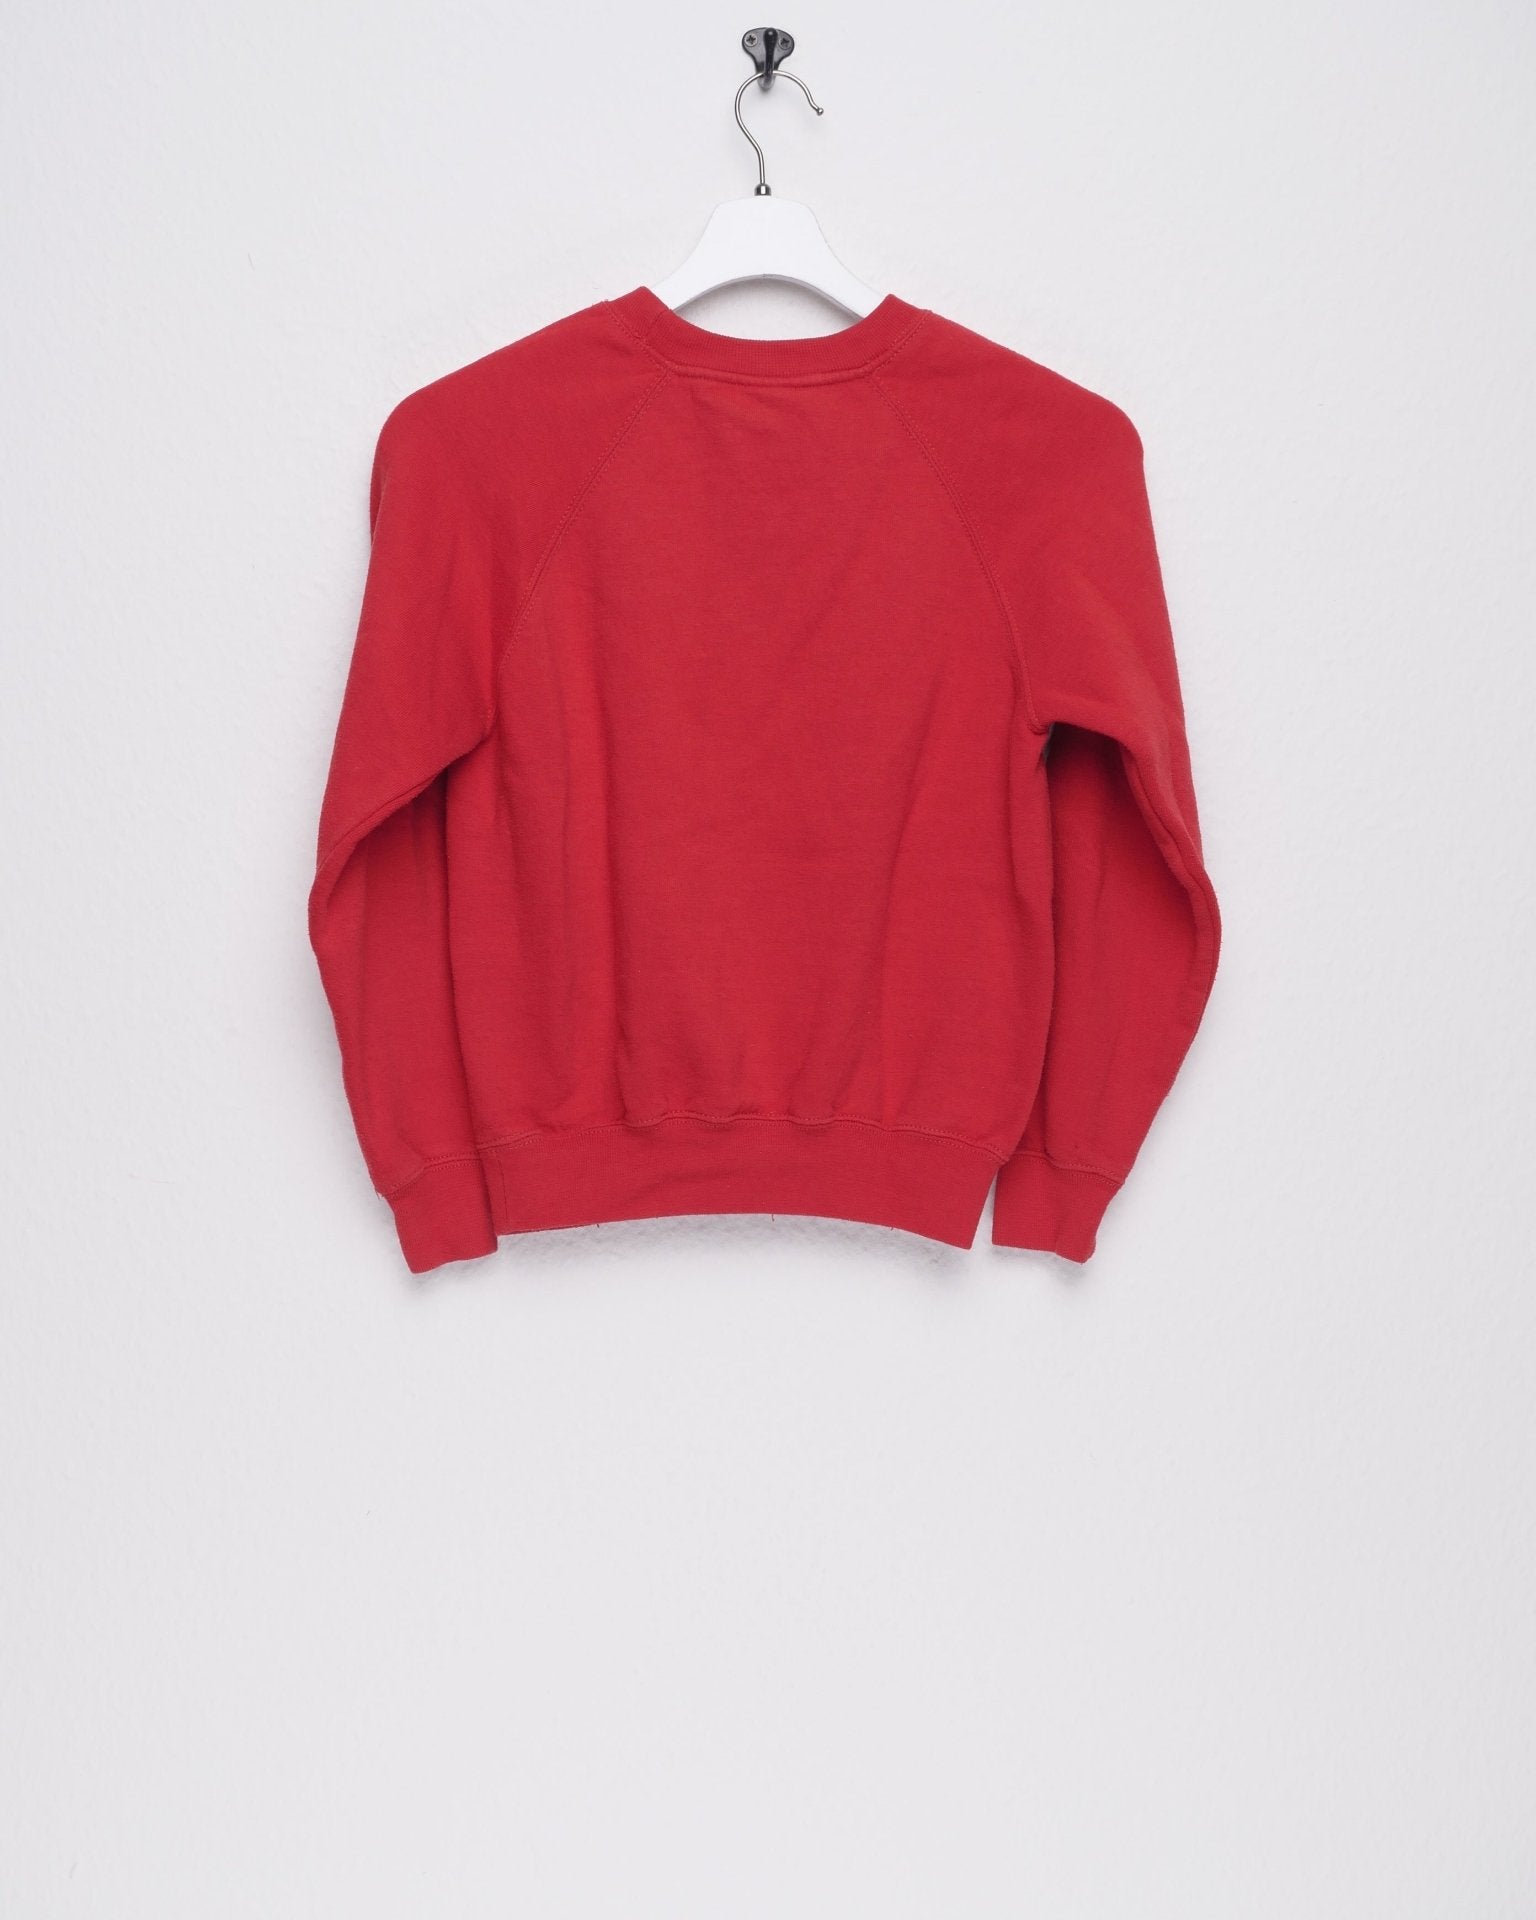 russell printed 'Gazelles Gymnastics Club' red Sweater - Peeces